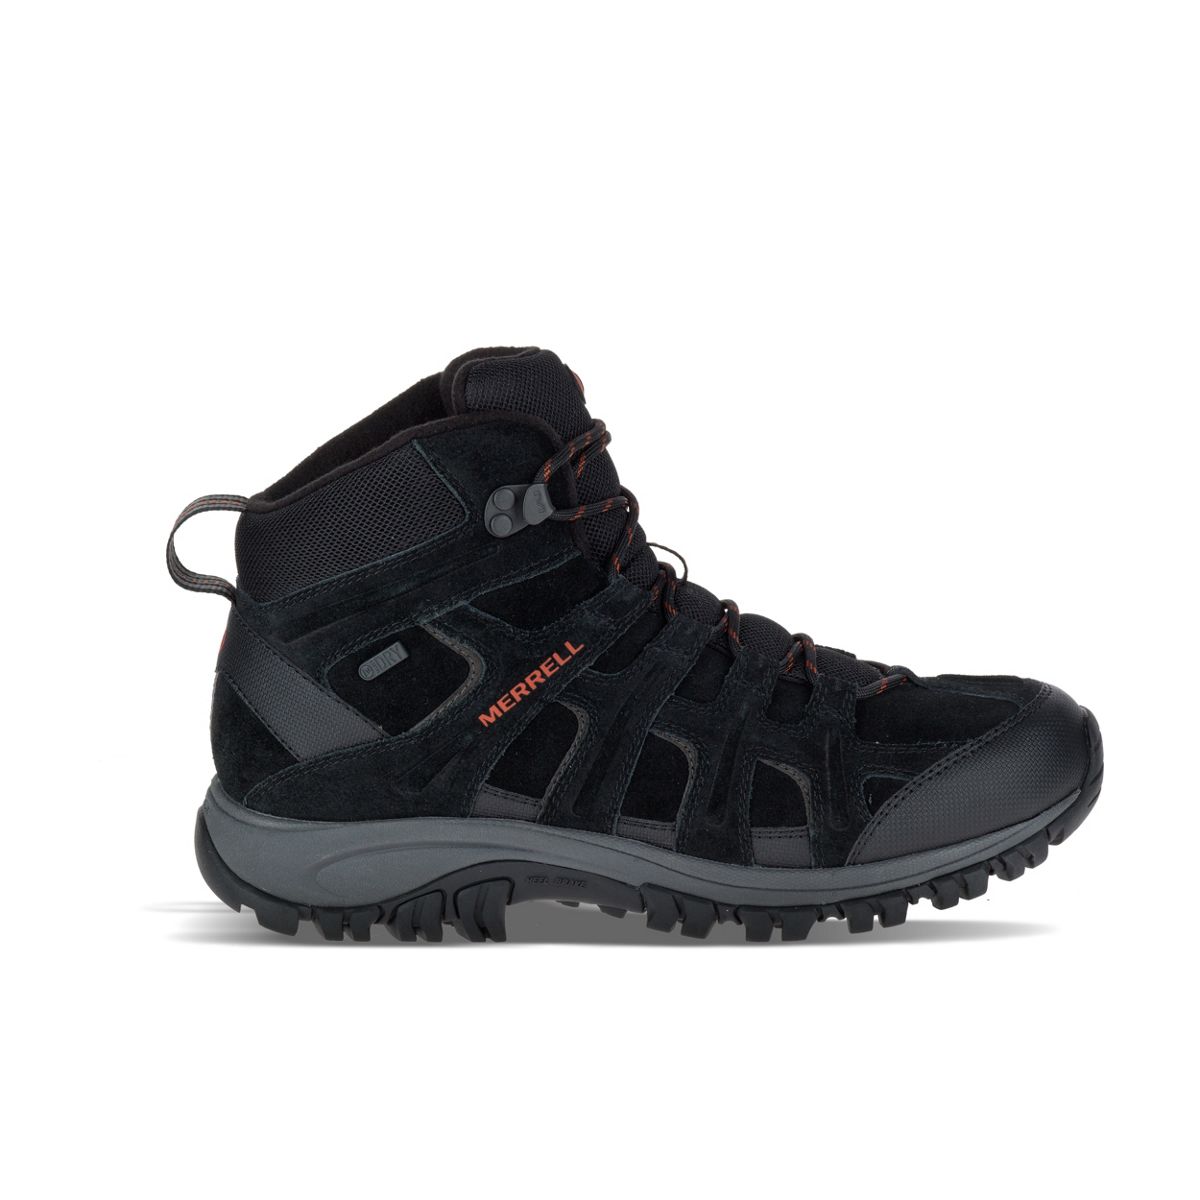 Phoenix 2 Mid Thermo Winter Hike Boots |